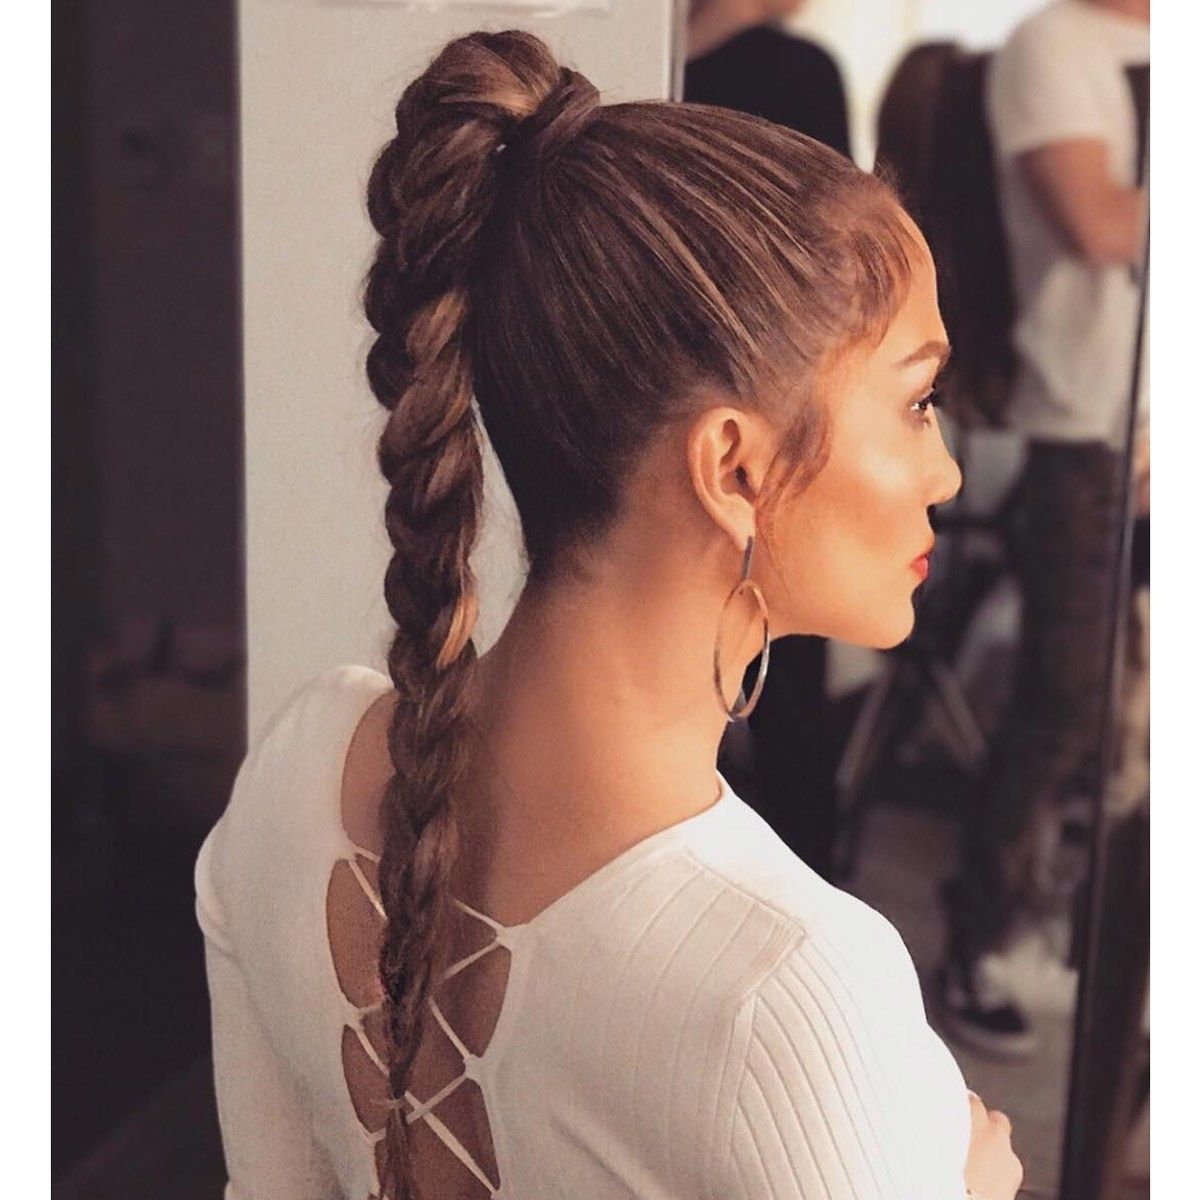 Current Pony Hairstyles With Textured Braid Regarding 27 Ponytail Hairstyles For 2018: Best Ponytail Styles (View 9 of 20)